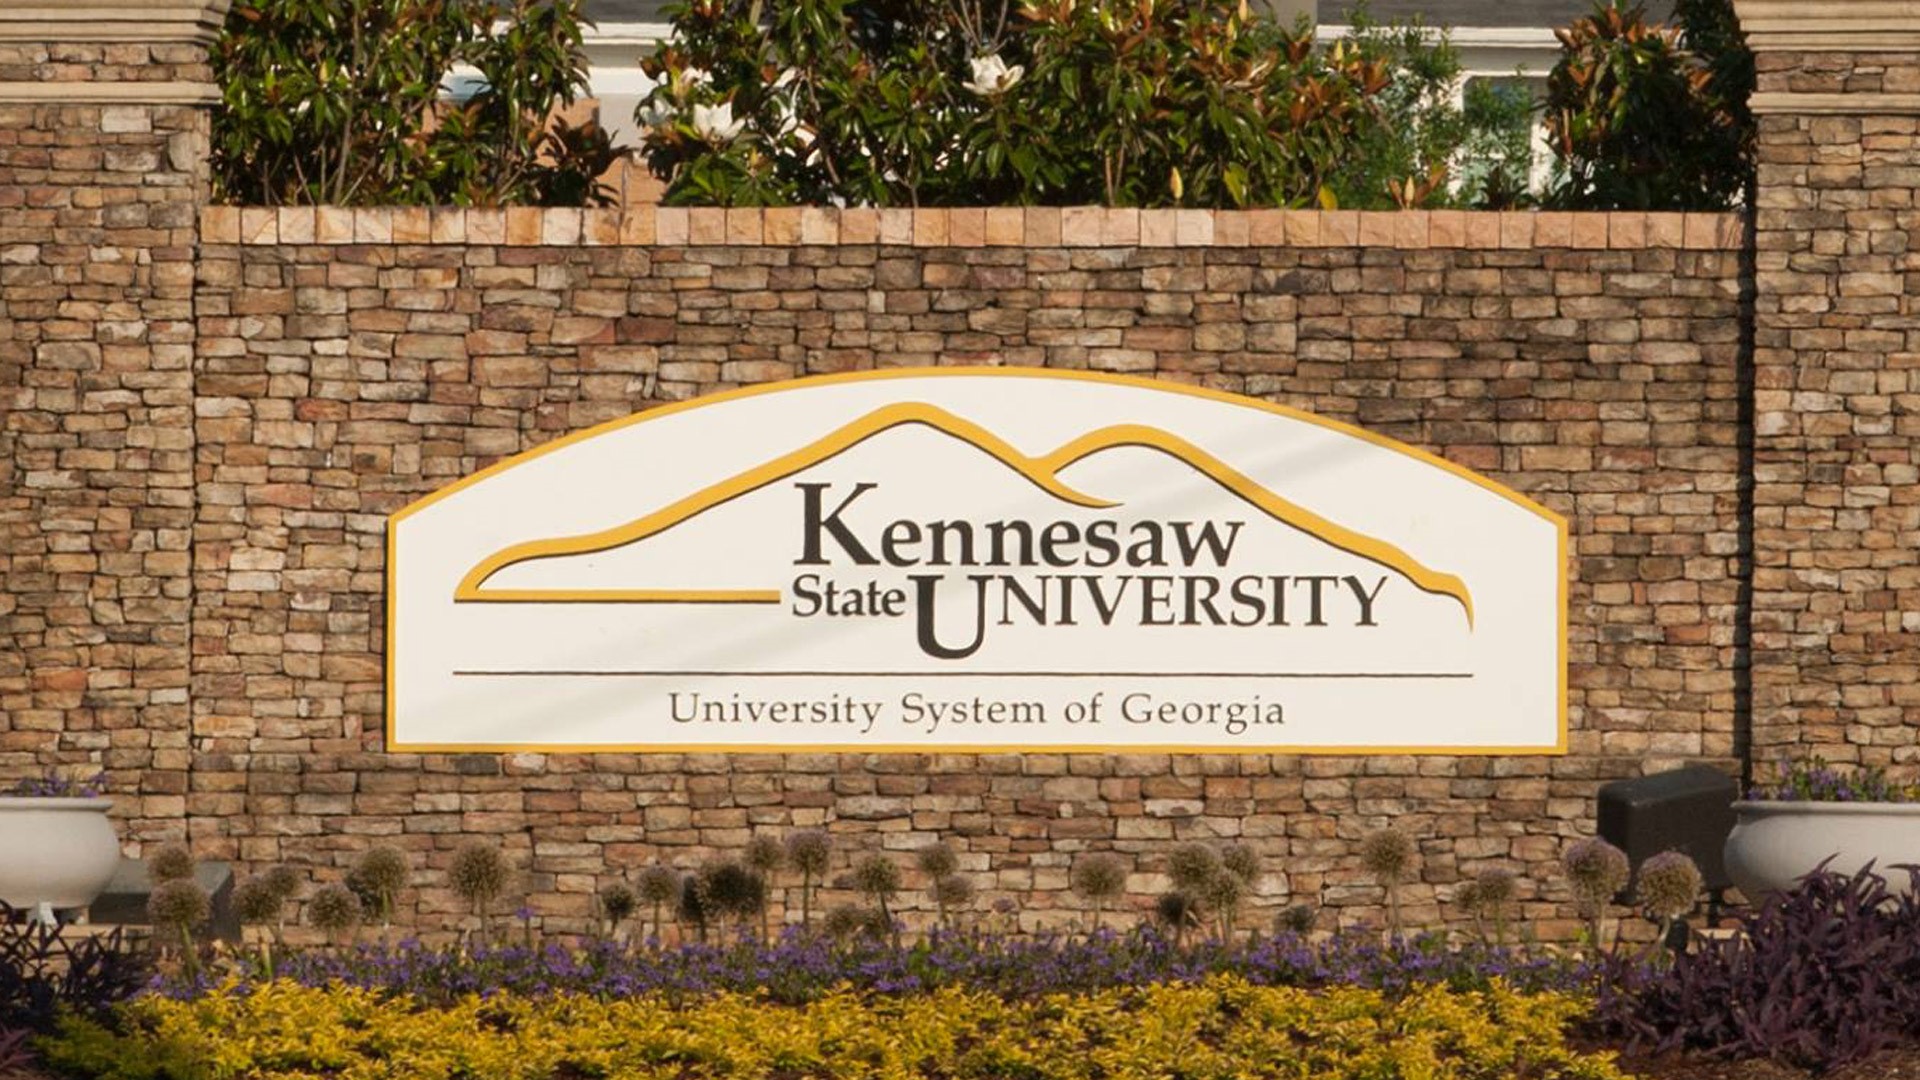 A spokesperson from KSU said an armed robbery was reported at a residential complex on campus and the suspects left. No injuries have been reported, officials said.